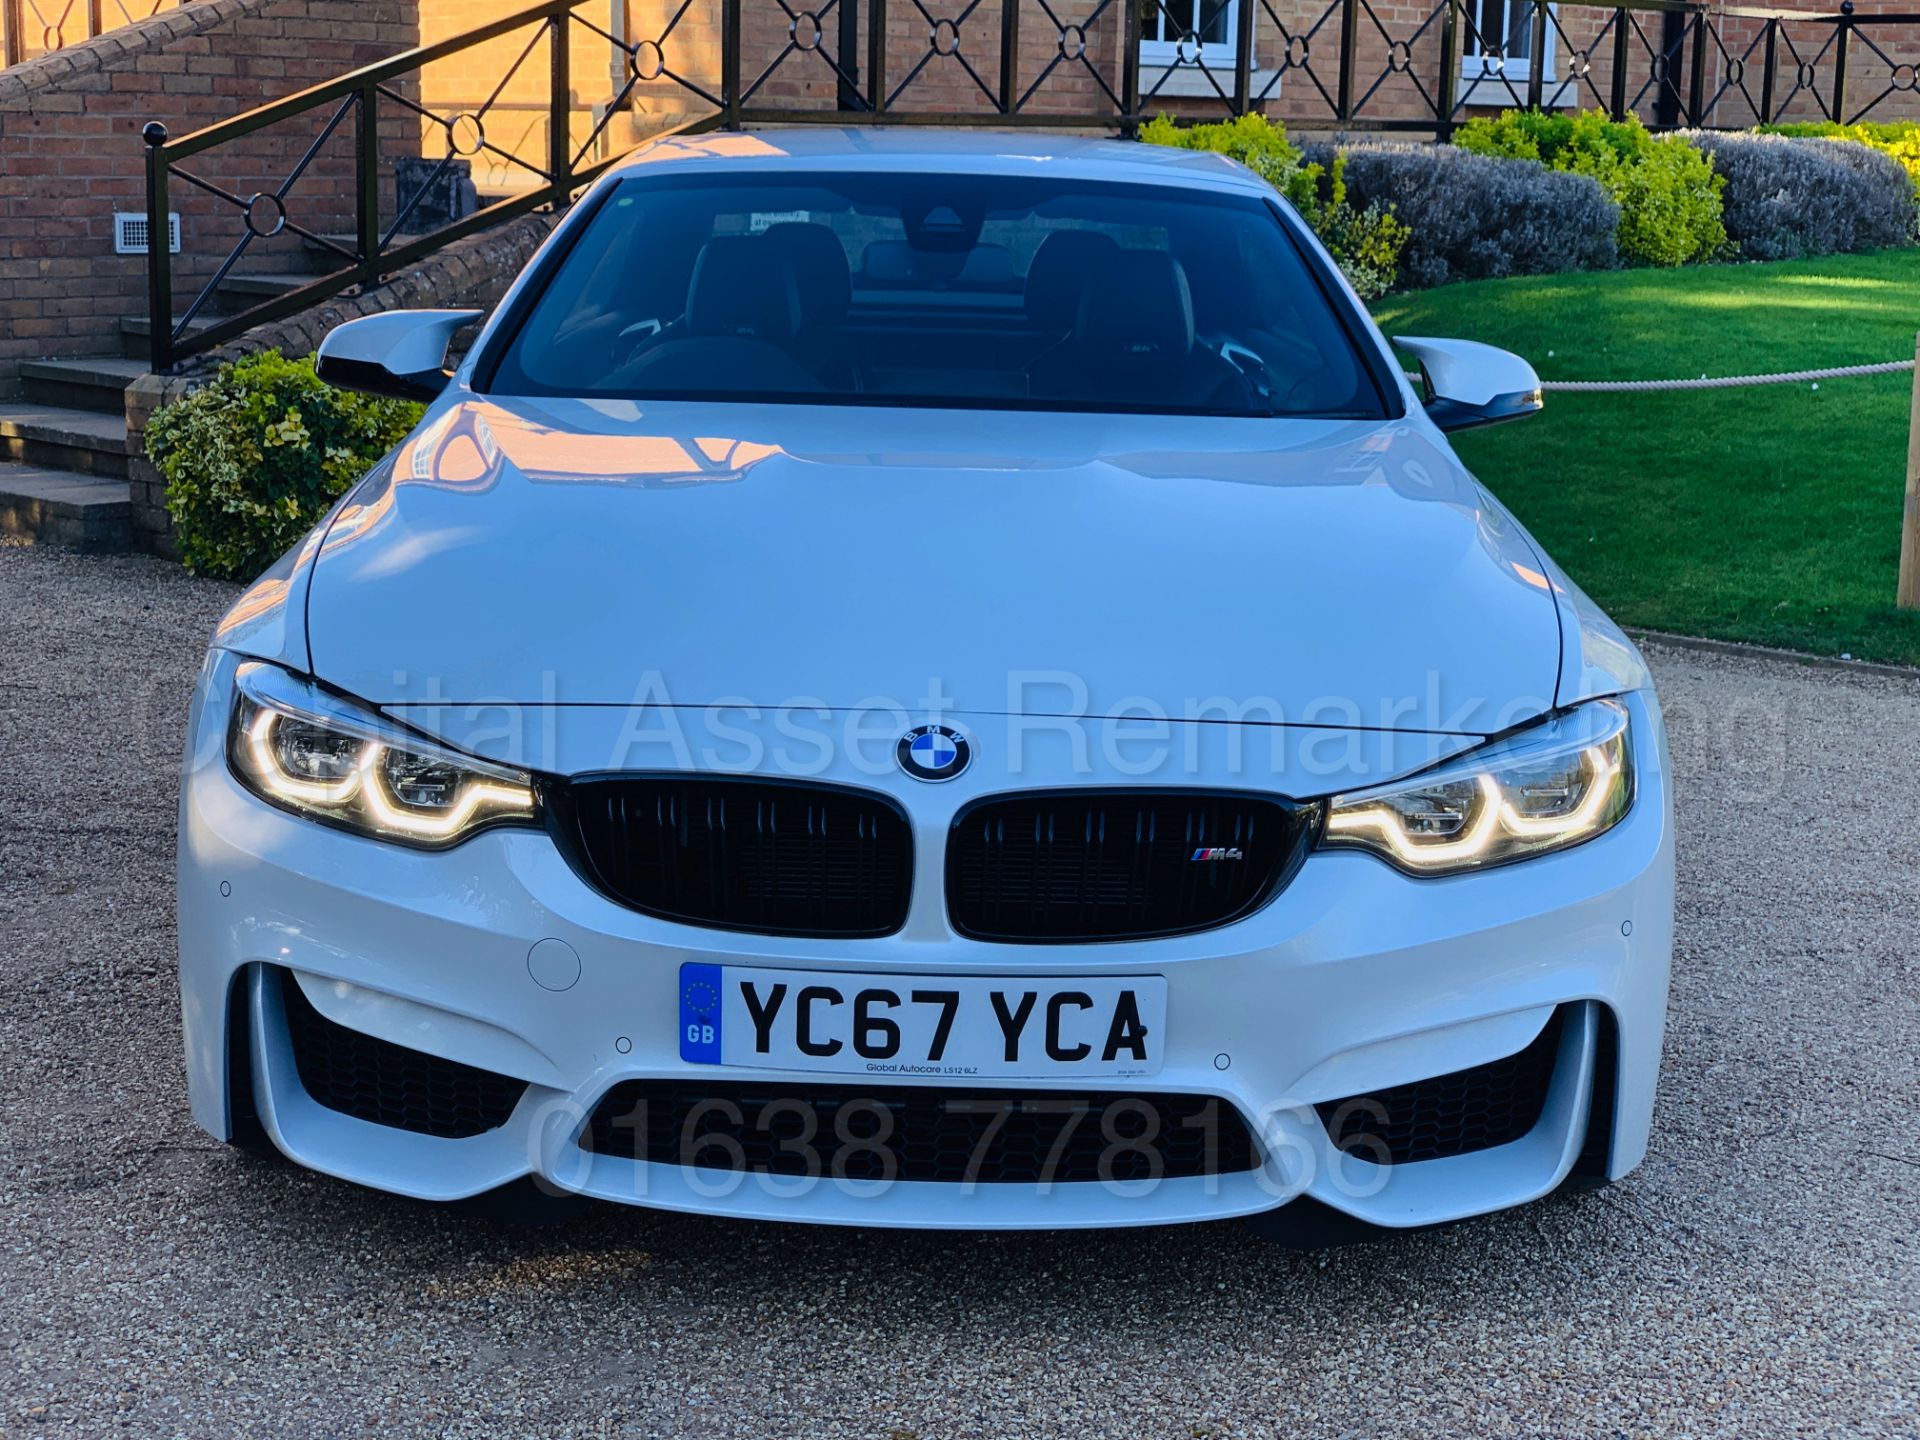 ON SALE BMW M4 CONVERTIBLE *COMPETITION PACKAGE* (2018 MODEL) '431 BHP - M DCT AUTO' WOW!!!!! - Image 24 of 89